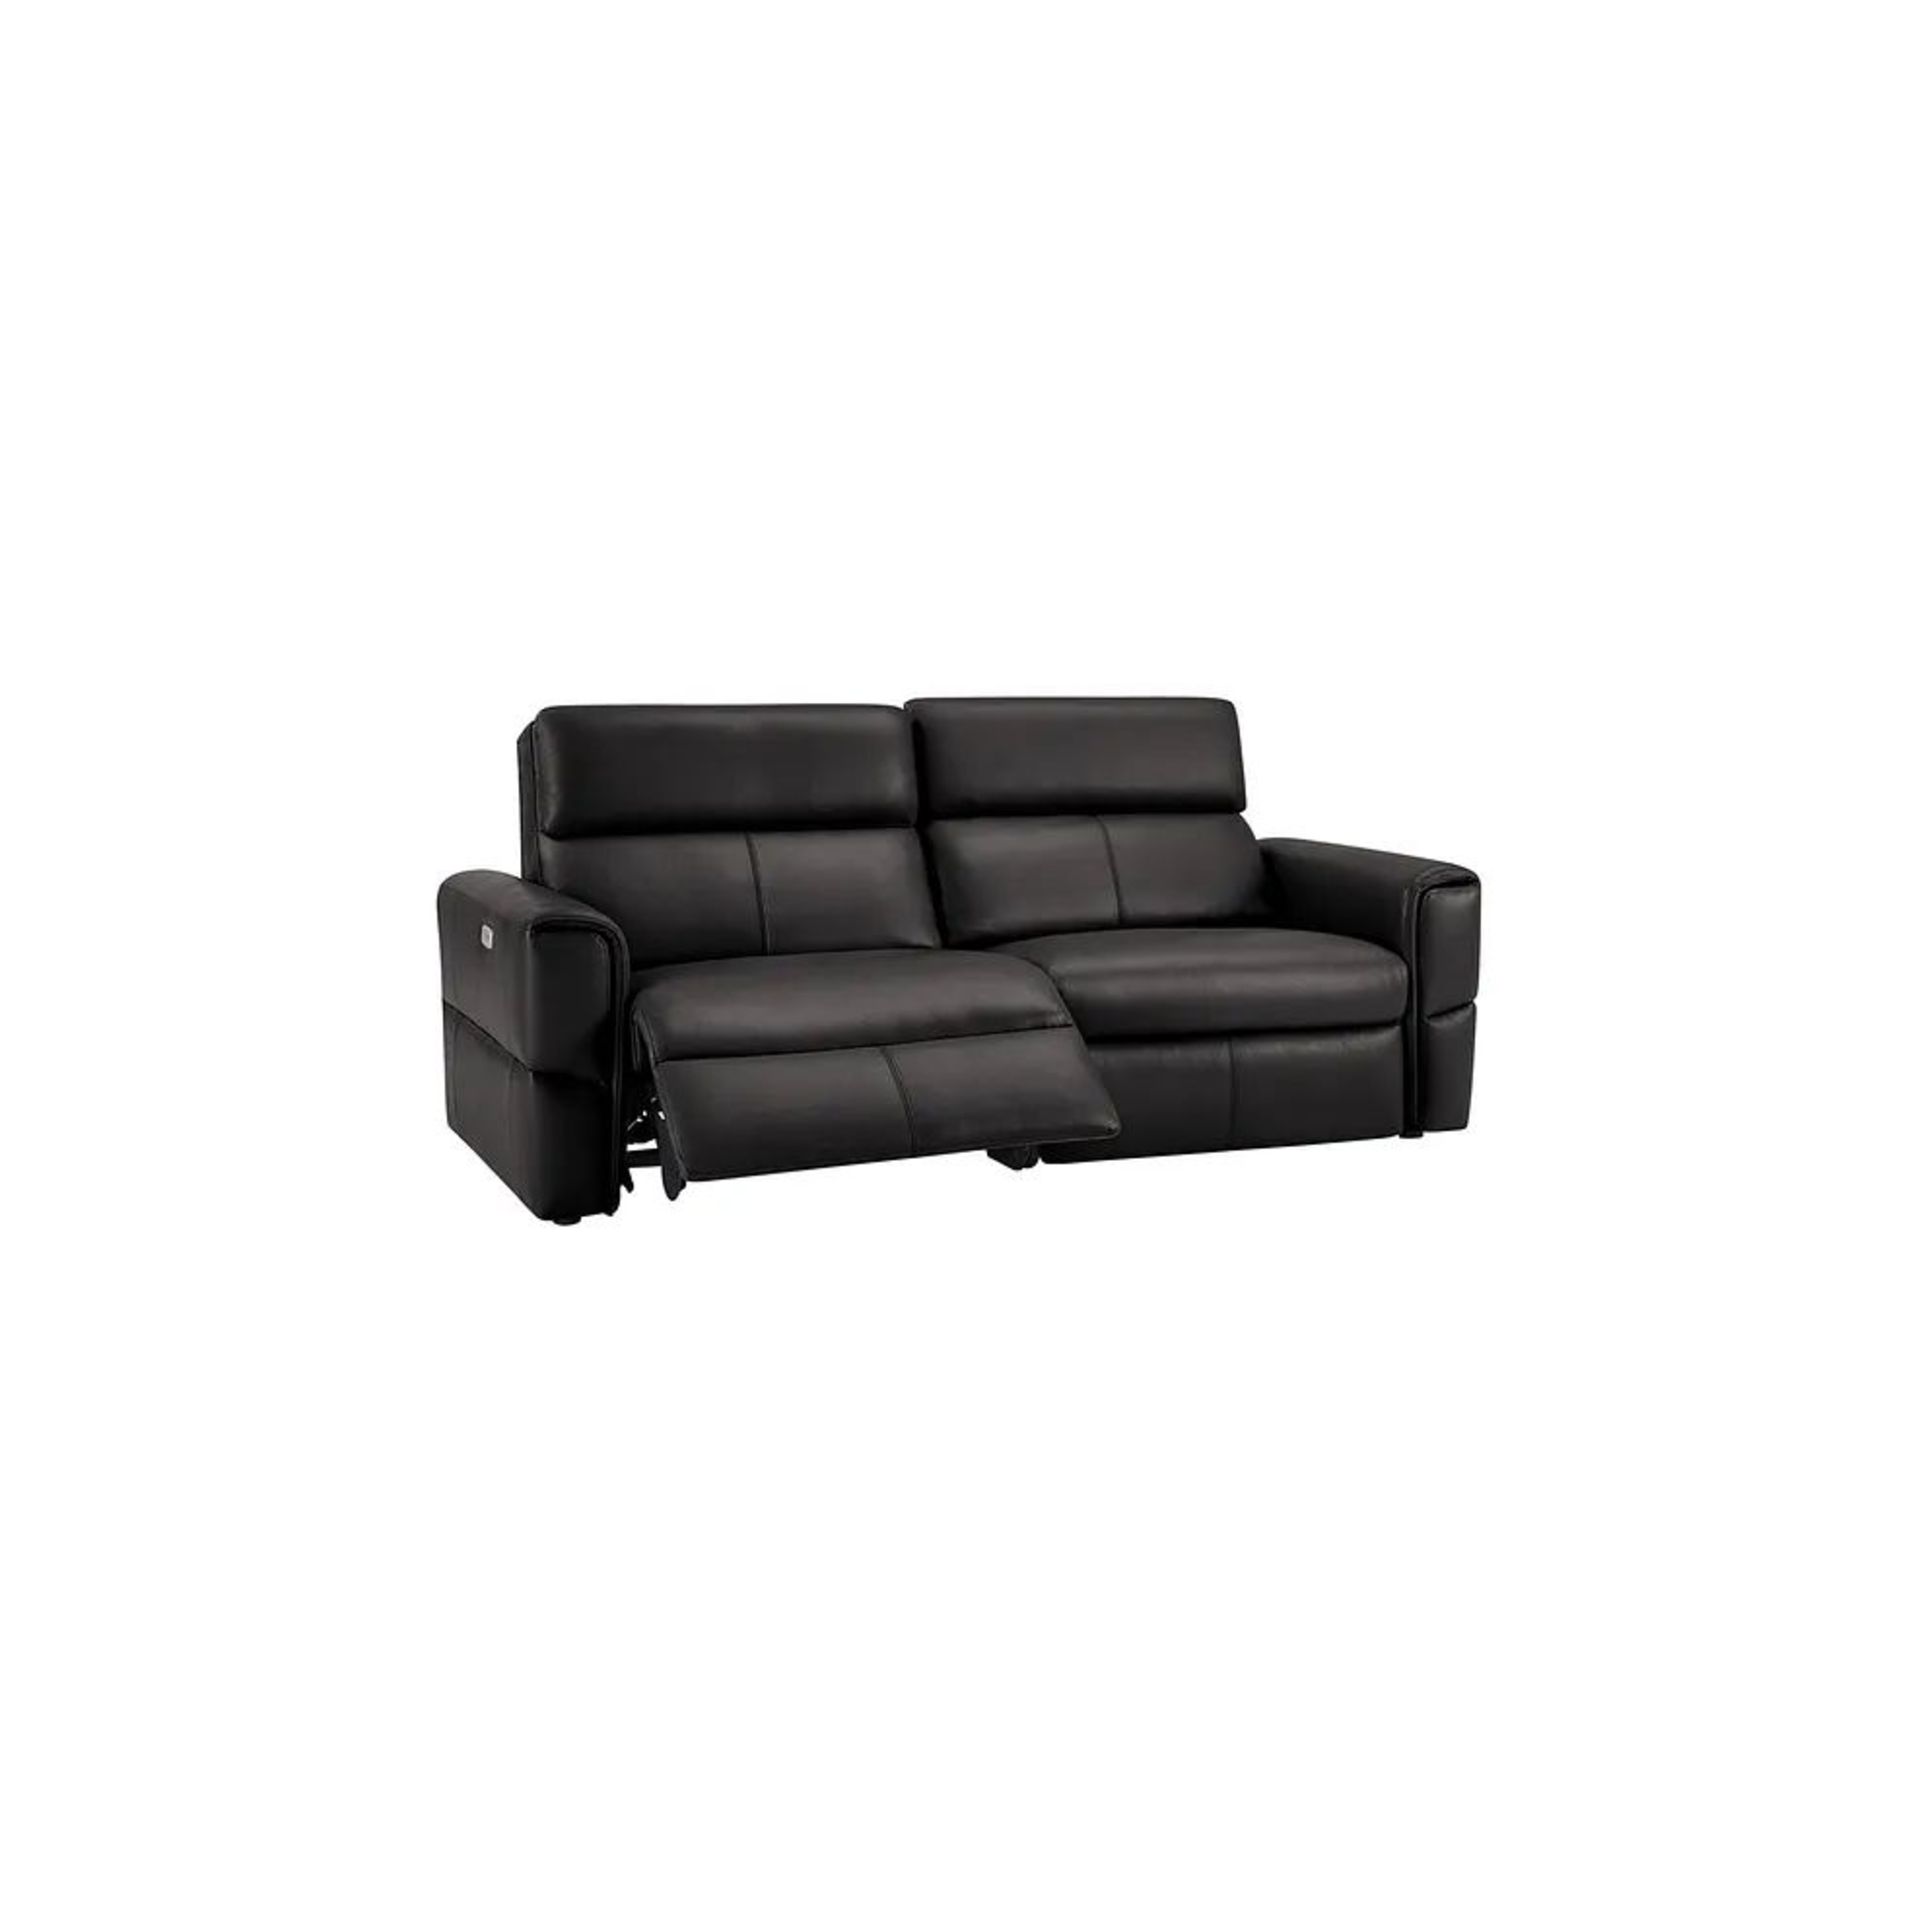 BRAND NEW SAMSON 3 Seater Electric Recliner Sofa - BLACK LEATHER. RRP £1779. Showcasing neat, modern - Image 3 of 8